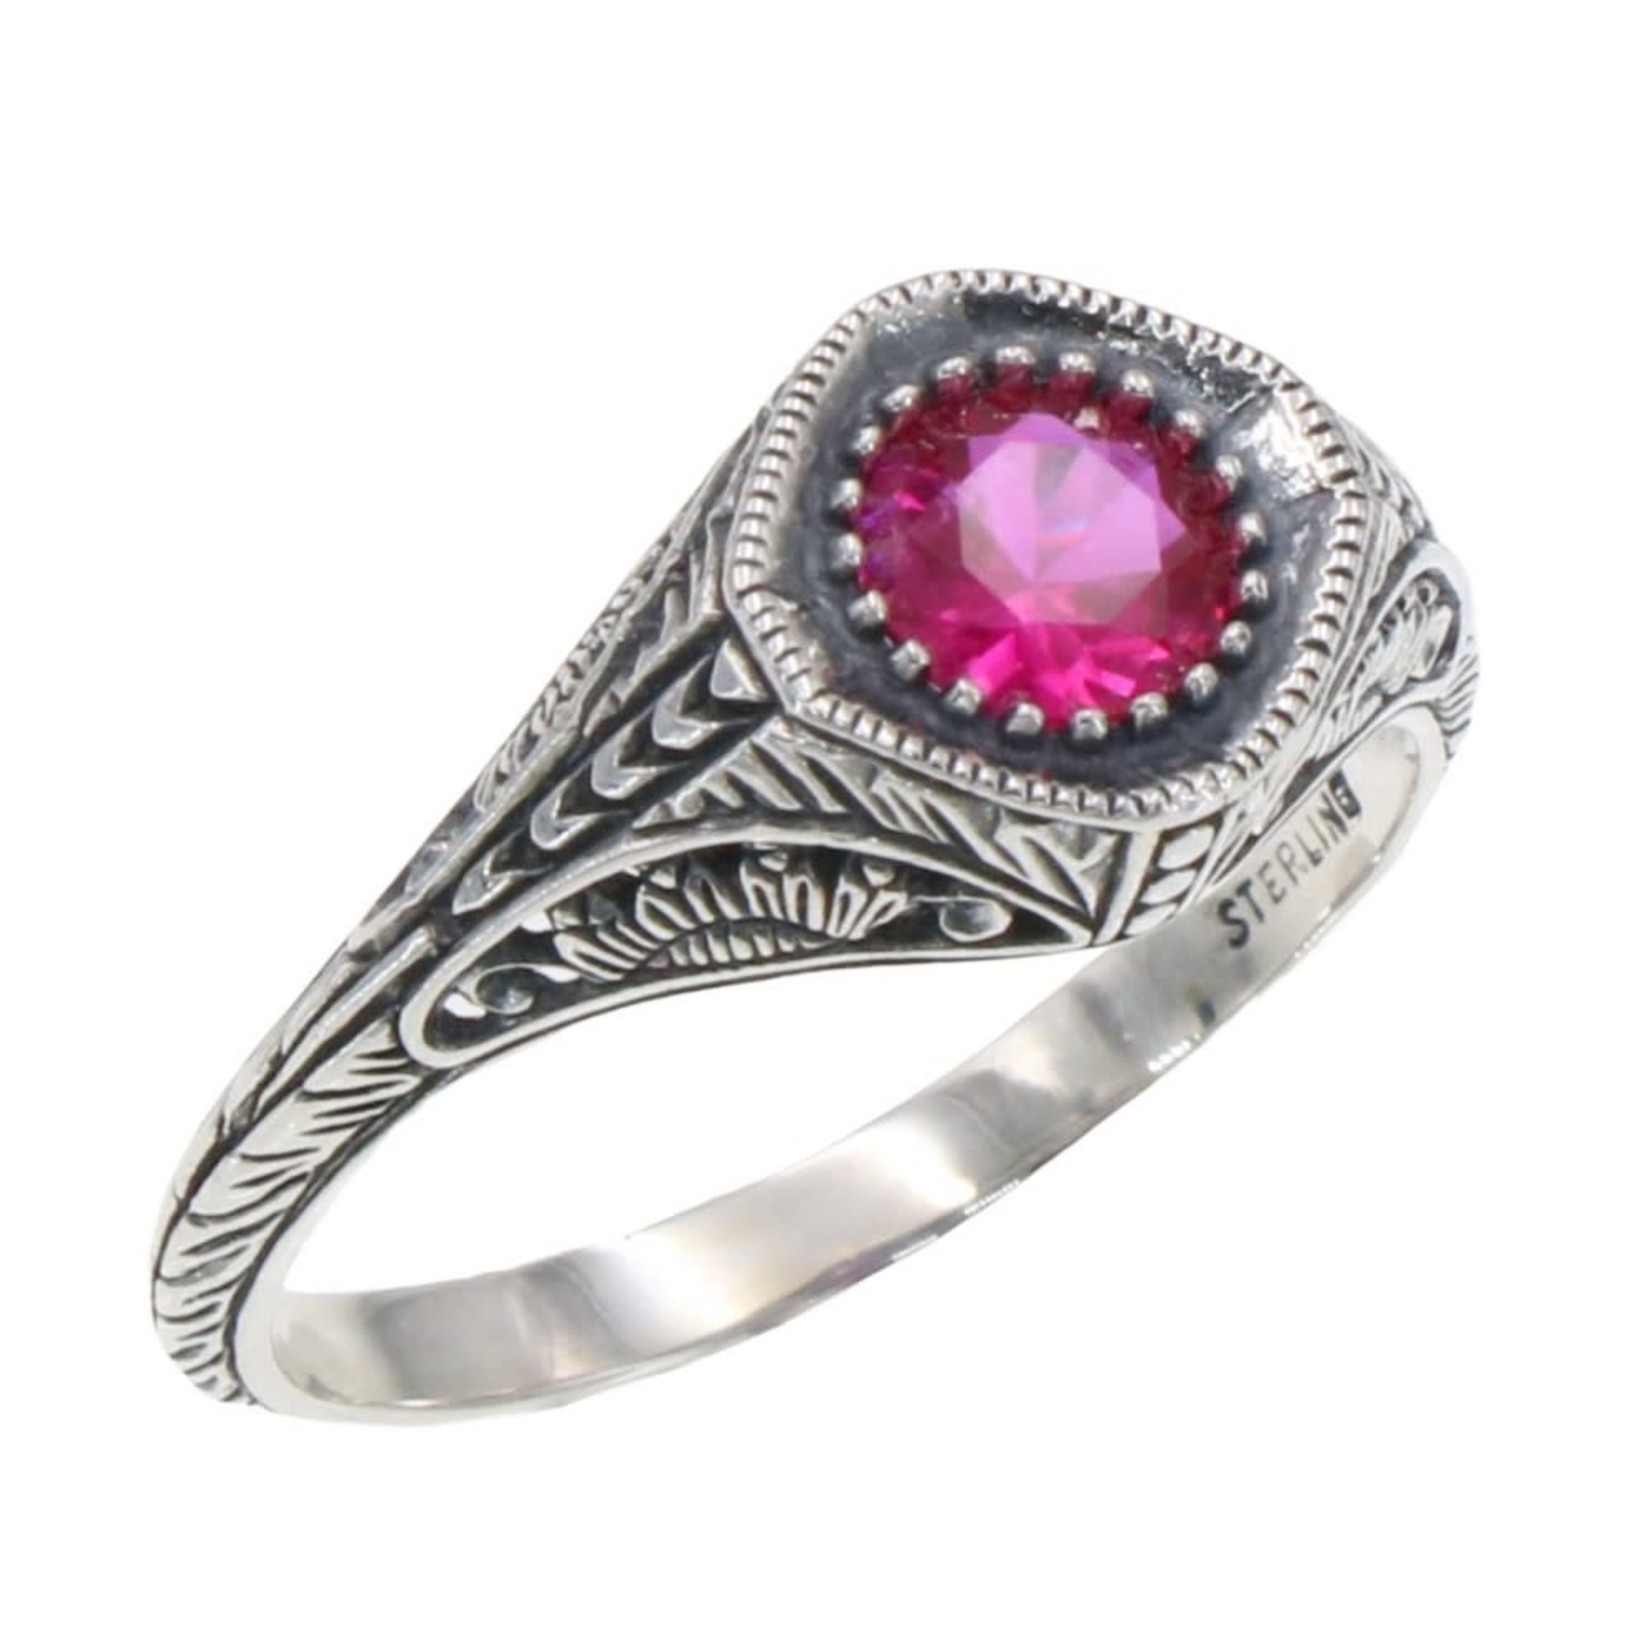 Trufili Art Deco Synthetic Pink Ruby Ring